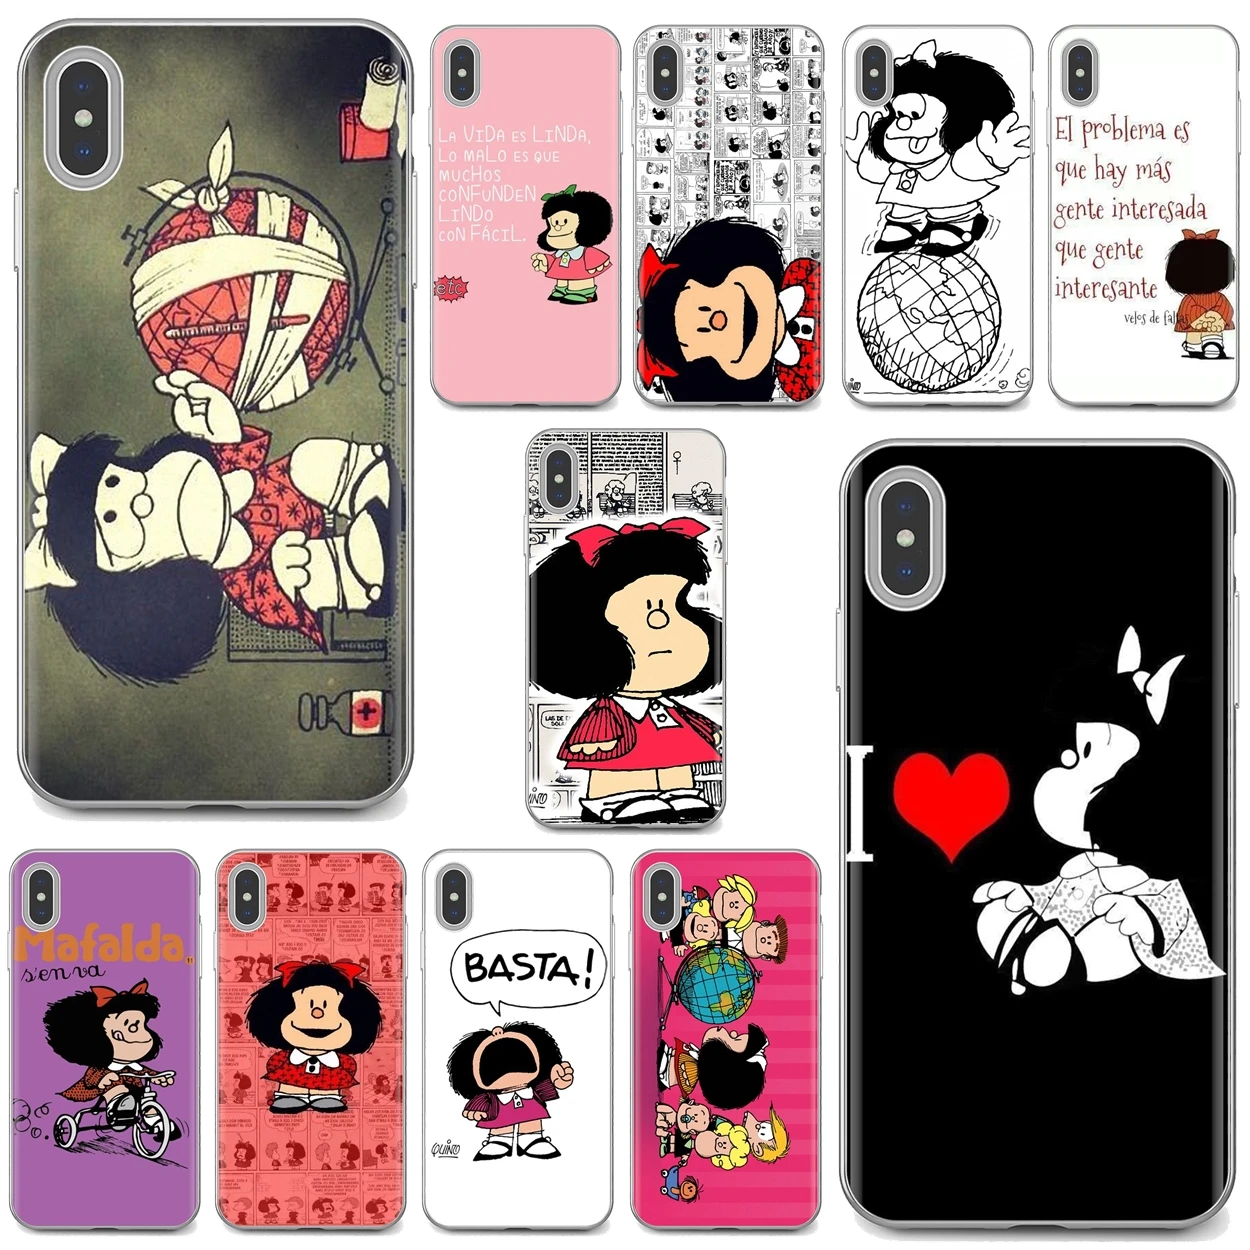 

Soft Case Cover For iPhone iPod Touch 11 12 Pro 4 4S 5 5S SE 5C 6 6S 7 8 X XR XS Plus Max 2020 Cartoon Mafalda Girl